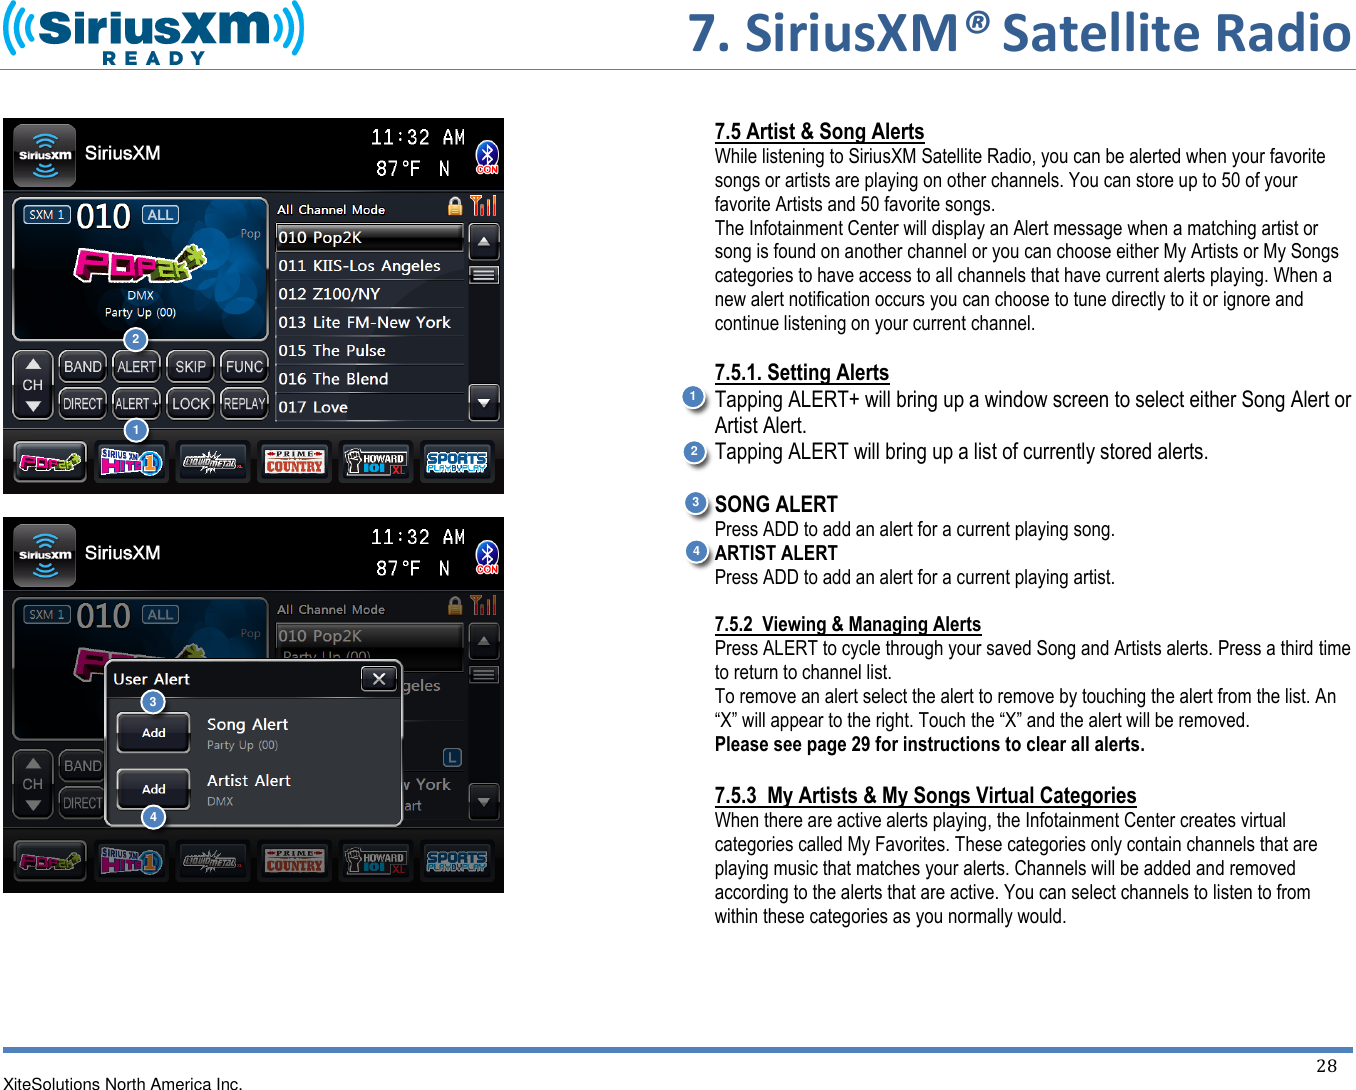       7. SiriusXM® Satellite Radio   XiteSolutions North America Inc.  28             7.5 Artist &amp; Song Alerts While listening to SiriusXM Satellite Radio, you can be alerted when your favorite songs or artists are playing on other channels. You can store up to 50 of your favorite Artists and 50 favorite songs.  The Infotainment Center will display an Alert message when a matching artist or song is found on another channel or you can choose either My Artists or My Songs categories to have access to all channels that have current alerts playing. When a new alert notification occurs you can choose to tune directly to it or ignore and continue listening on your current channel.  7.5.1. Setting Alerts Tapping ALERT+ will bring up a window screen to select either Song Alert or Artist Alert. Tapping ALERT will bring up a list of currently stored alerts.   SONG ALERT Press ADD to add an alert for a current playing song. ARTIST ALERT Press ADD to add an alert for a current playing artist.   7.5.2  Viewing &amp; Managing Alerts Press ALERT to cycle through your saved Song and Artists alerts. Press a third time to return to channel list. To remove an alert select the alert to remove by touching the alert from the list. An “X” will appear to the right. Touch the “X” and the alert will be removed. Please see page 29 for instructions to clear all alerts.  7.5.3  My Artists &amp; My Songs Virtual Categories When there are active alerts playing, the Infotainment Center creates virtual categories called My Favorites. These categories only contain channels that are playing music that matches your alerts. Channels will be added and removed according to the alerts that are active. You can select channels to listen to from within these categories as you normally would.     1 2 1 2 3 4 3 4 